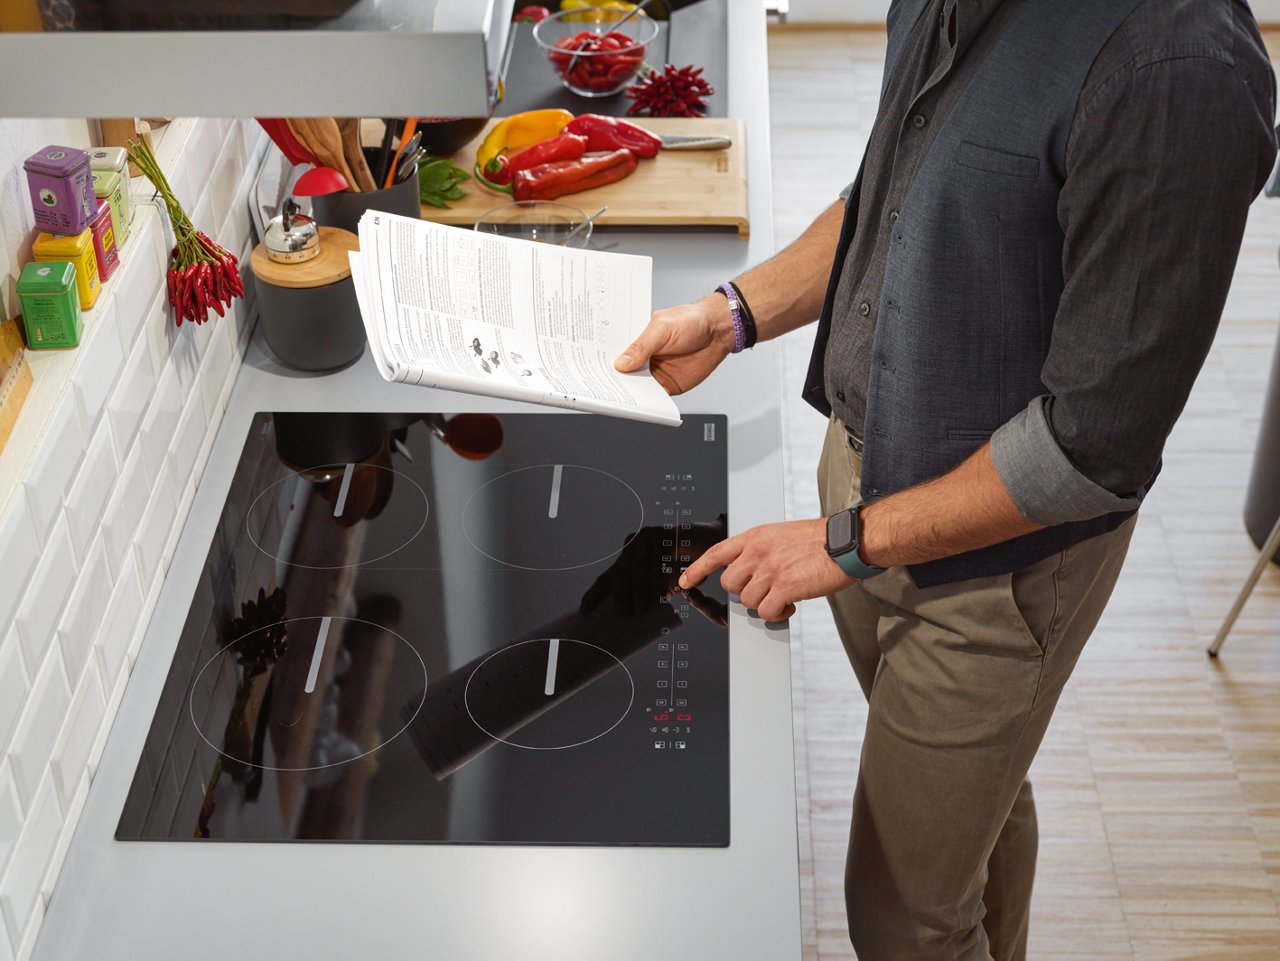 Man reading instruction manual of an induction hob